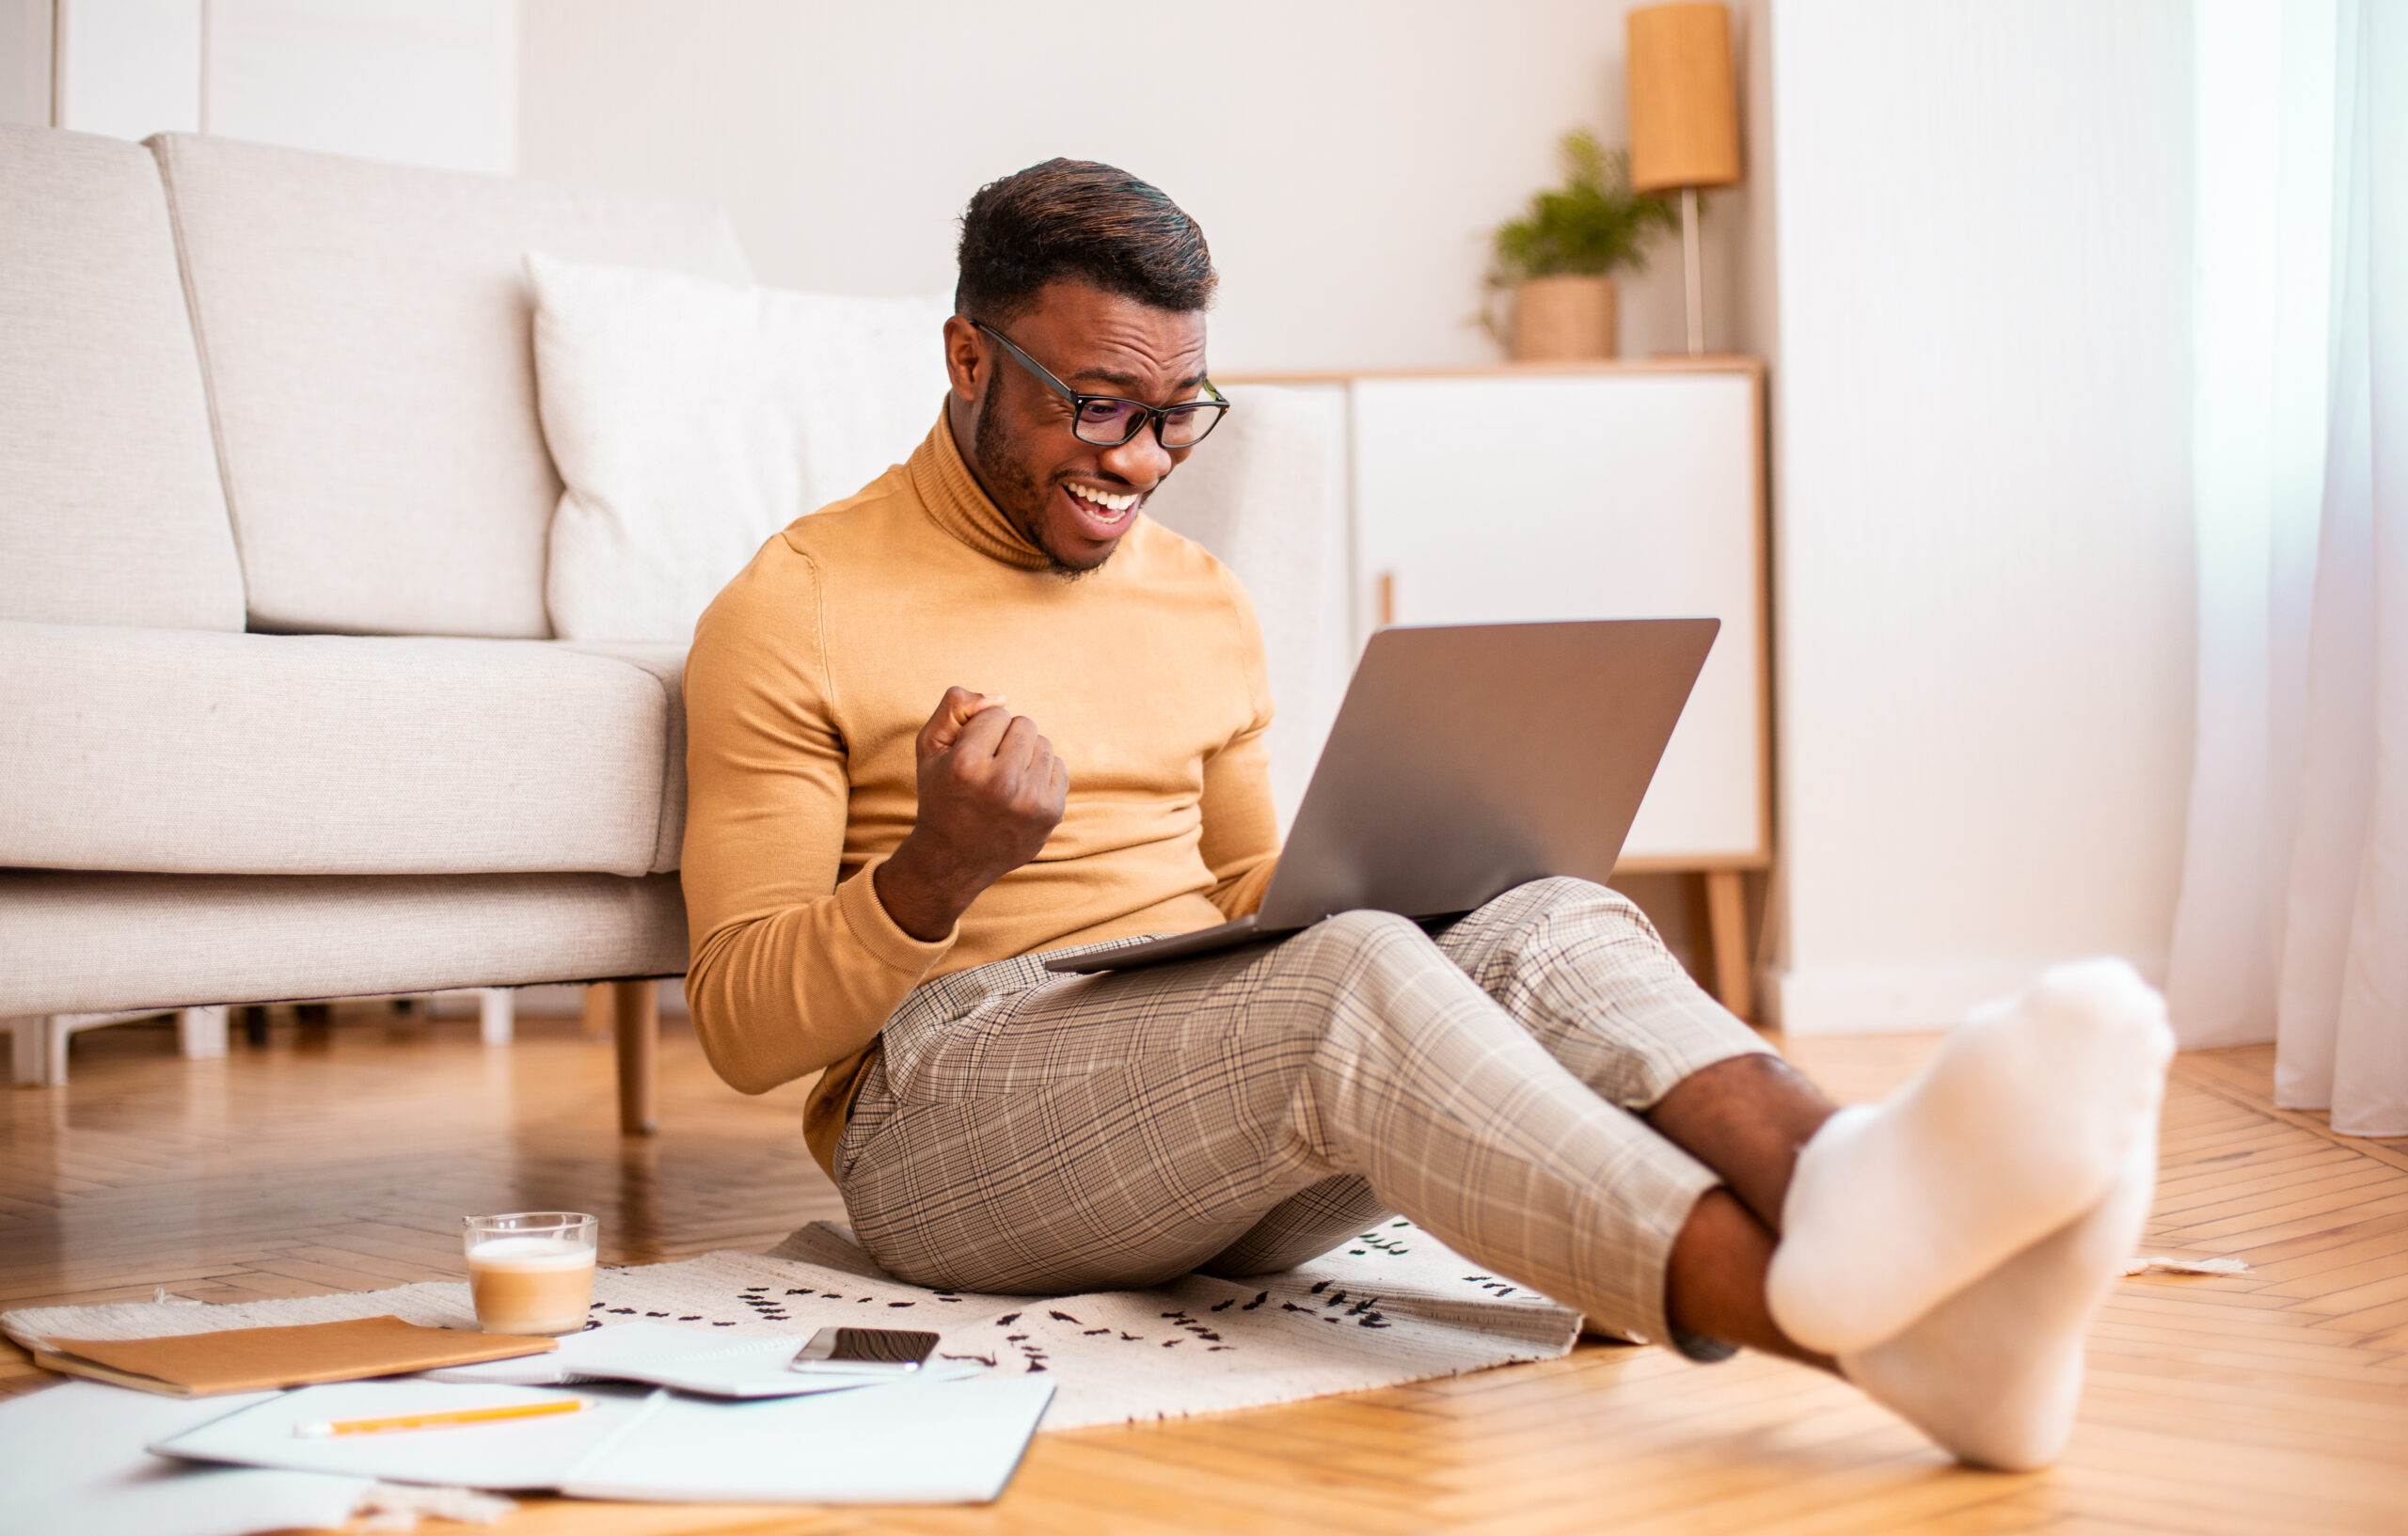 Excited guy using laptop shaking fists sitting at home on the floor with his laptop